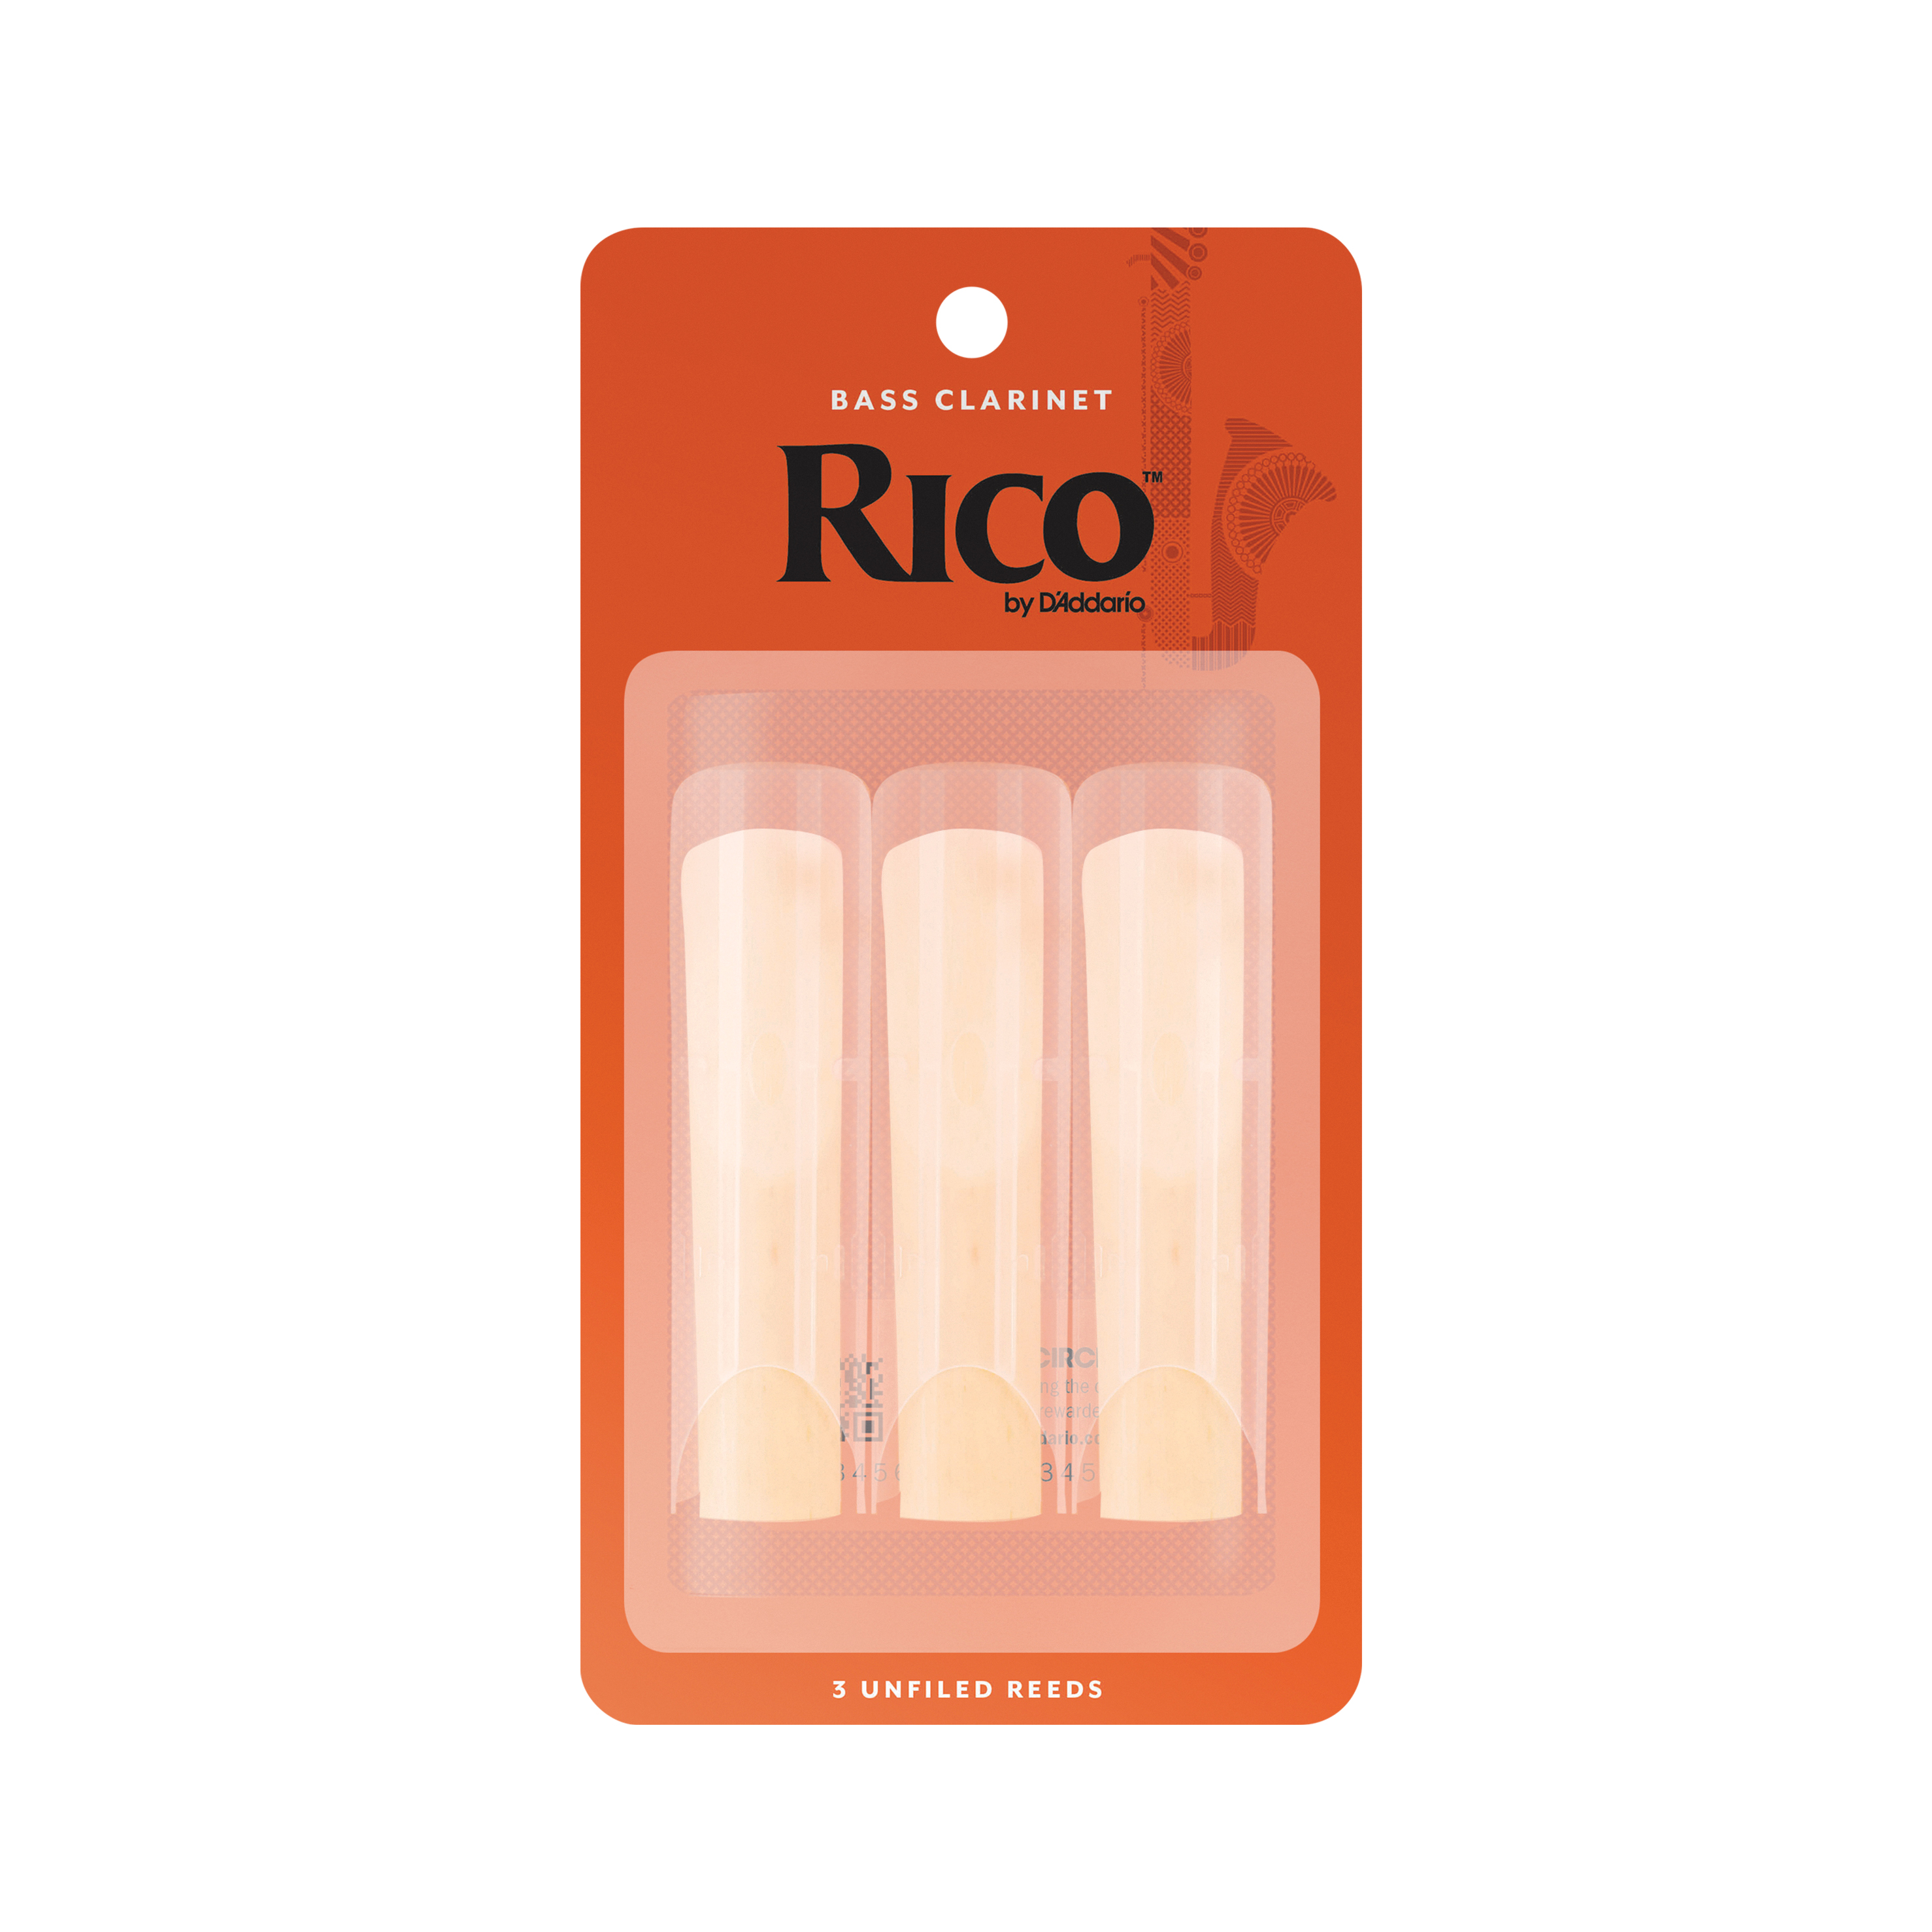 Orange Three pack of Rico by D'addario Bass Clarinet reeds, strength two and a half